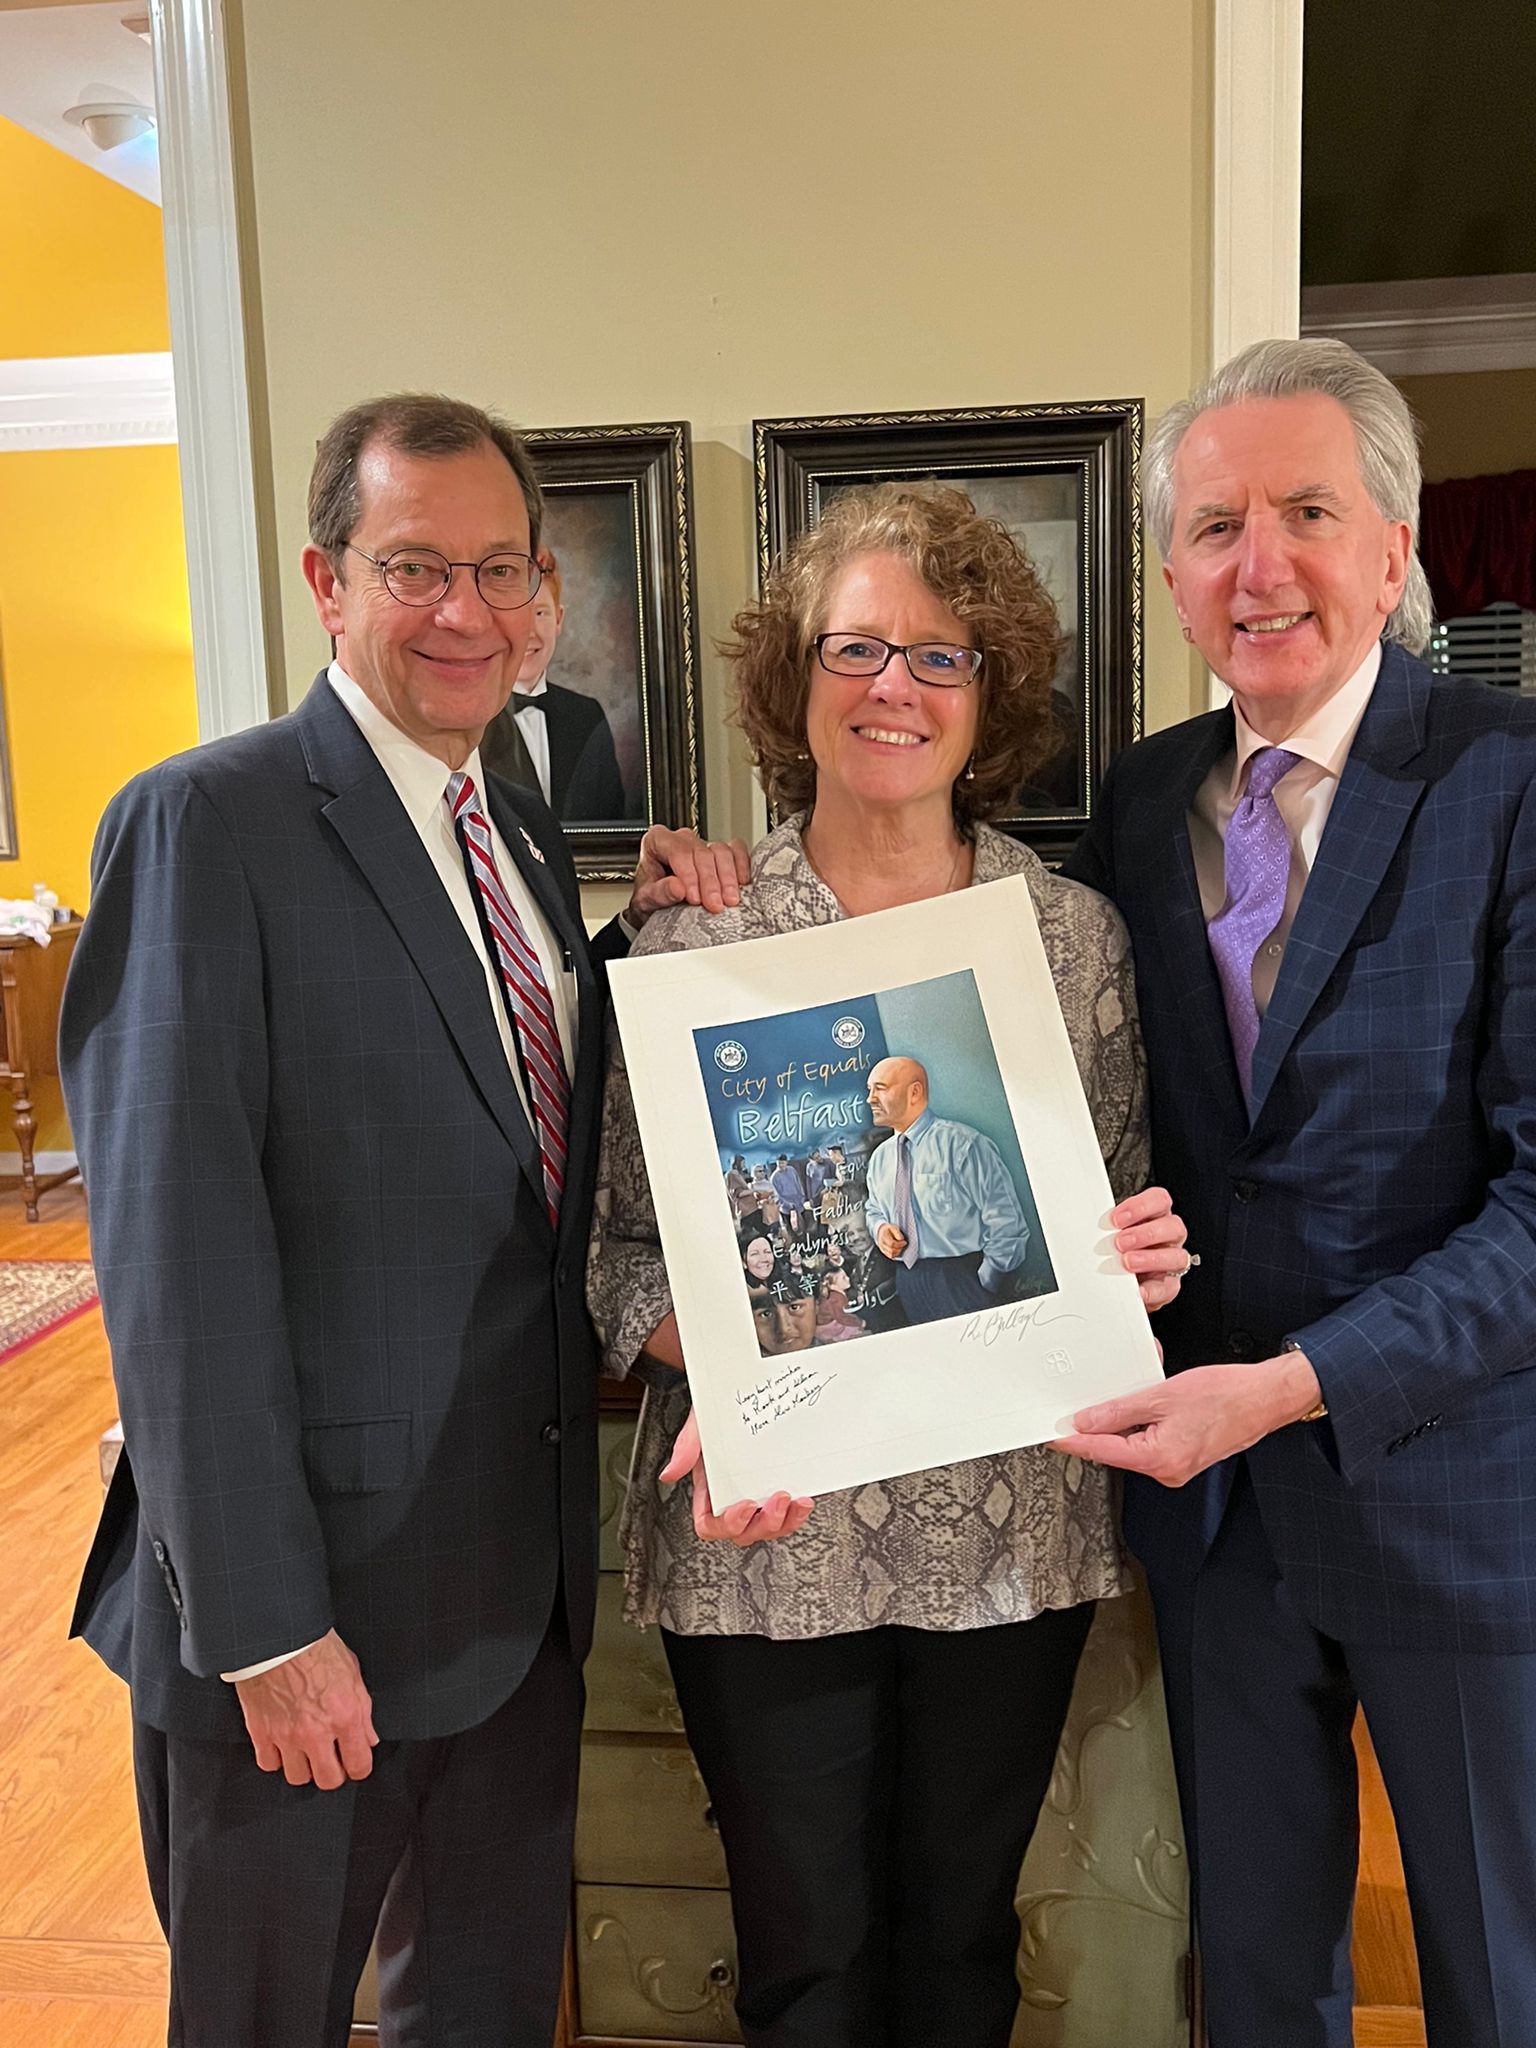 PARALLELS: Presenting a print of a portrait by Robert Ballagh of Alex Maskey, the first republican mayor of Belfast, to Allison and Mark Jackson at the Birmingham home. 